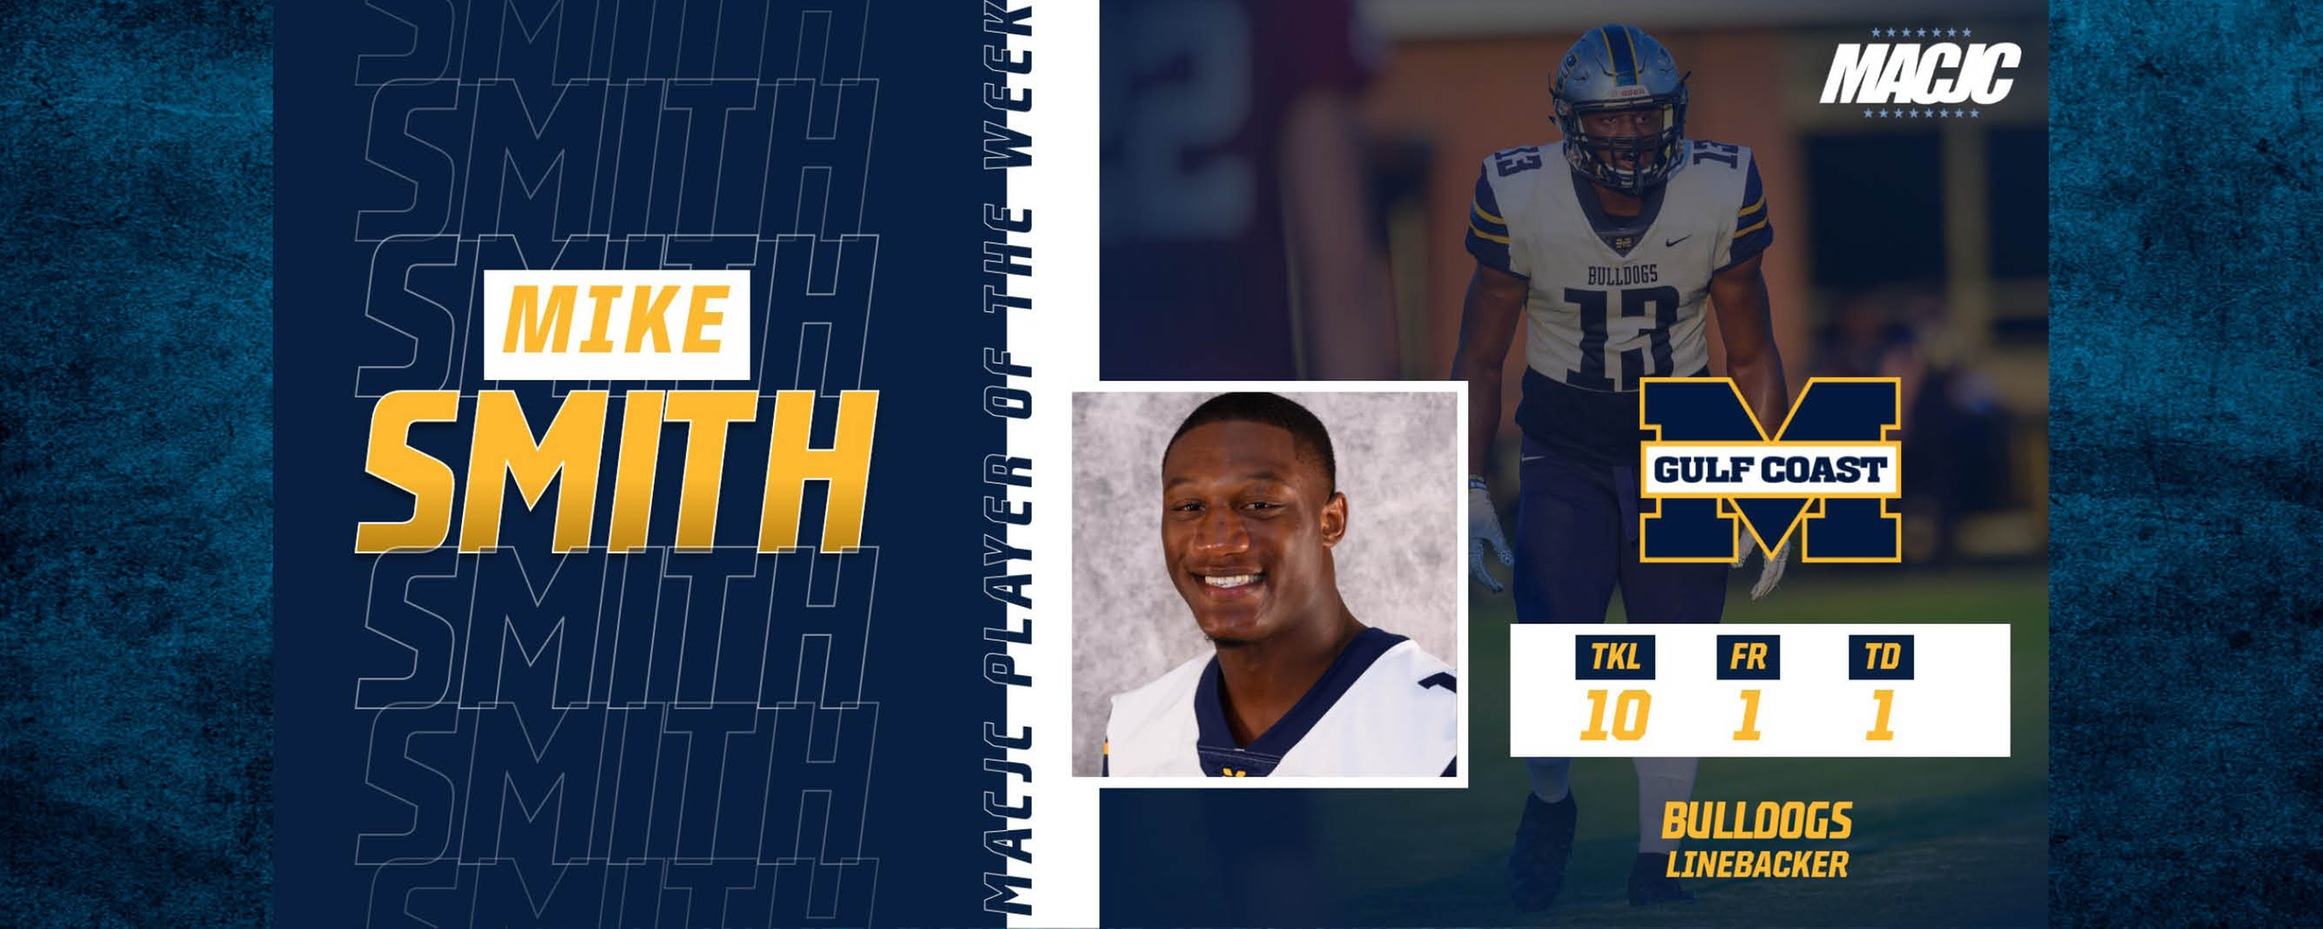 Smith named MACJC Defensive Player of the Week